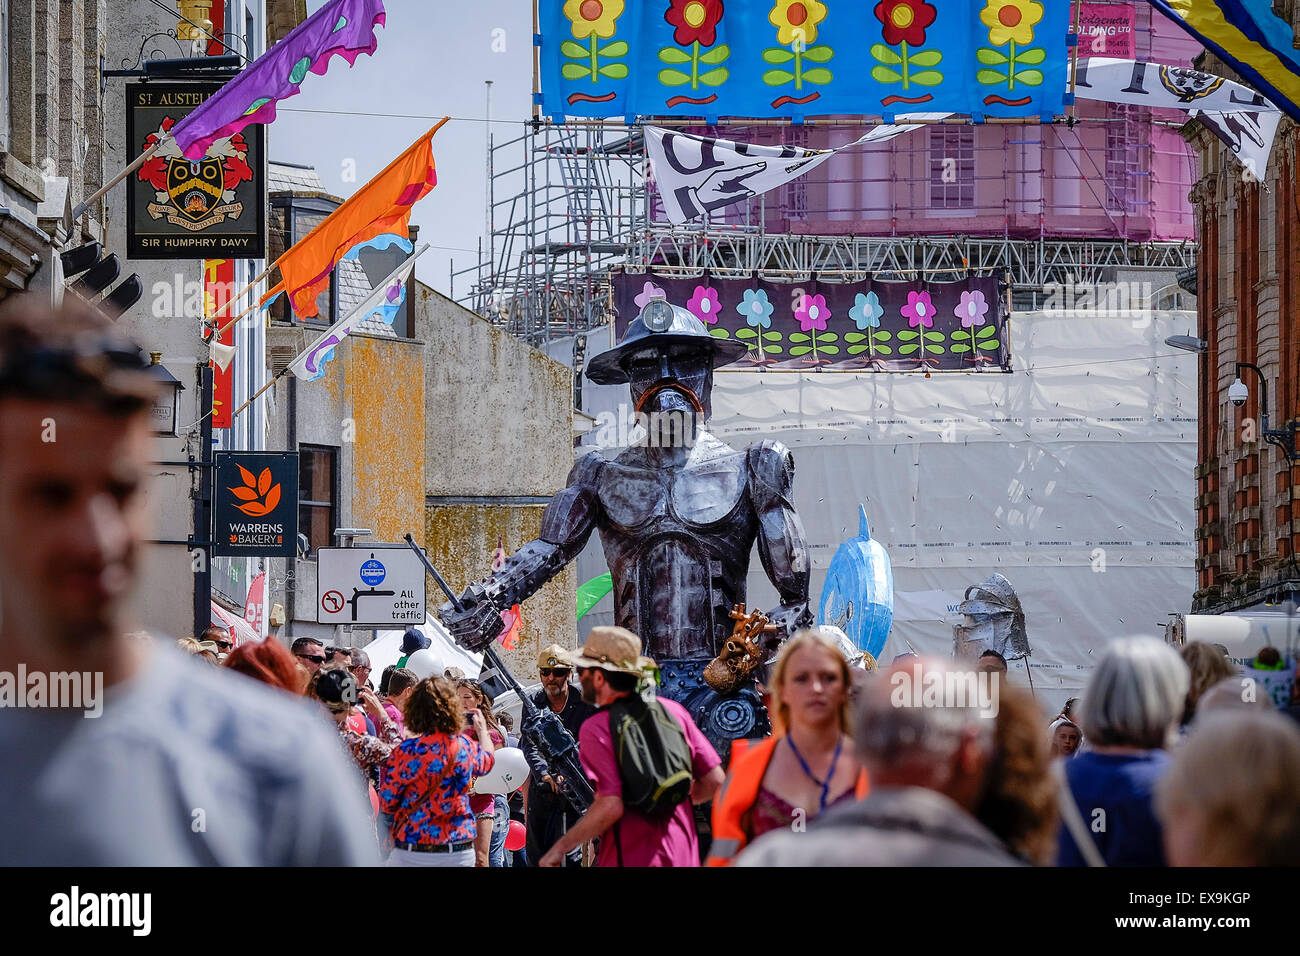 A huge effigy of a Cornish tin miner being carried during one of the colourful parades on Mazey Day, part of the Golowan Festiva Stock Photo